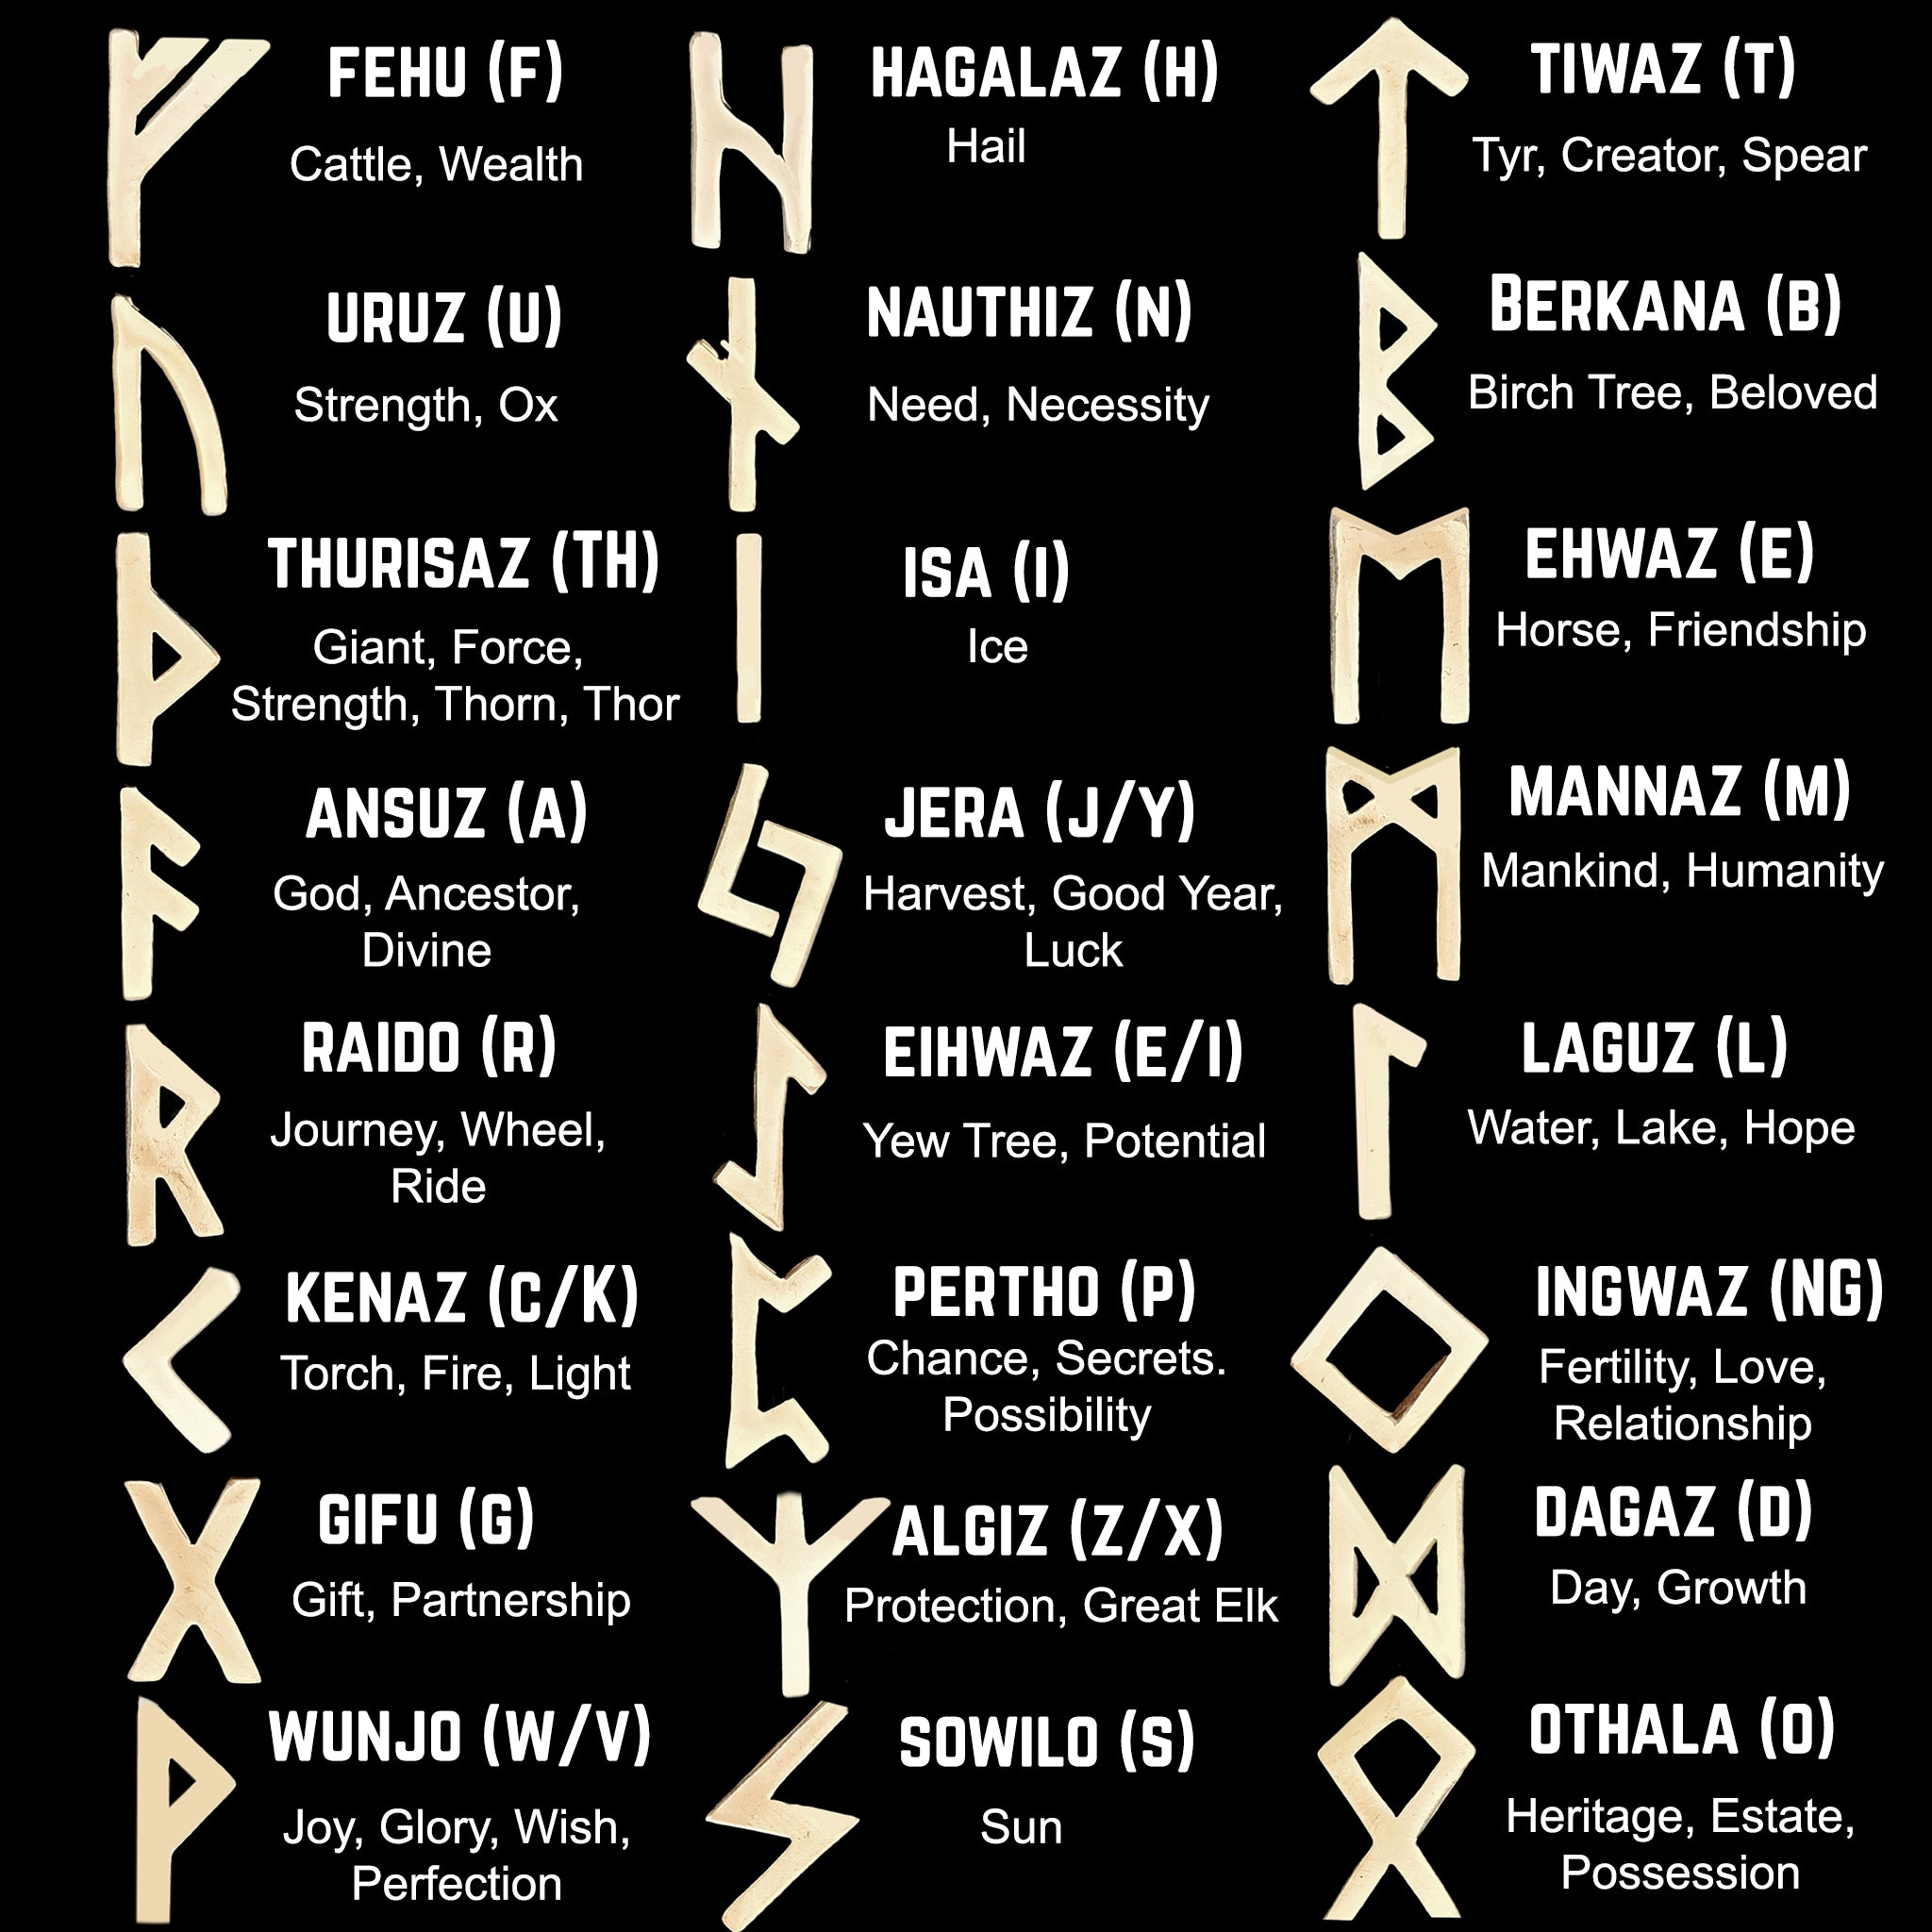 elder futhark runes and meanings